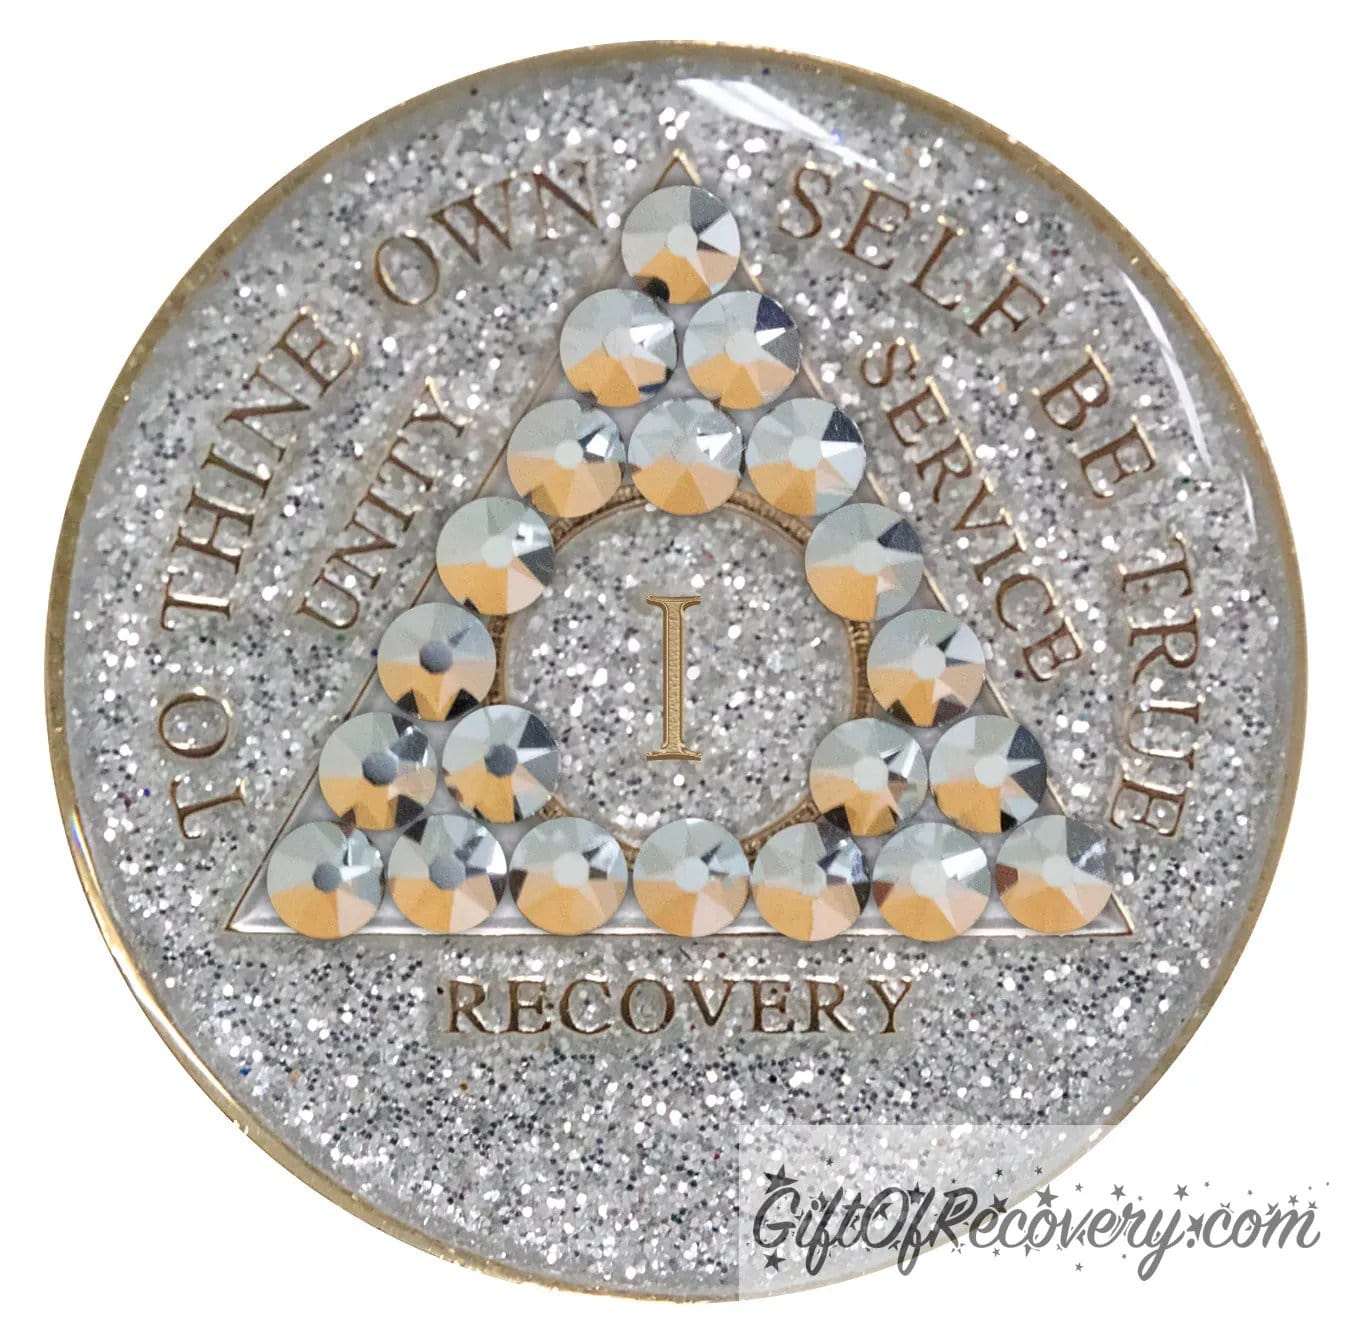 1 year silver glitter AA medallion with 21 genuine comet crystals, forming a triangle around the 1 year, while the year, unity, service, recovery, rim, and To Thine Own Self Be True are embossed in 14k gold, sealed with resin to give it a glossy finish, hand painted and scratch resistant.